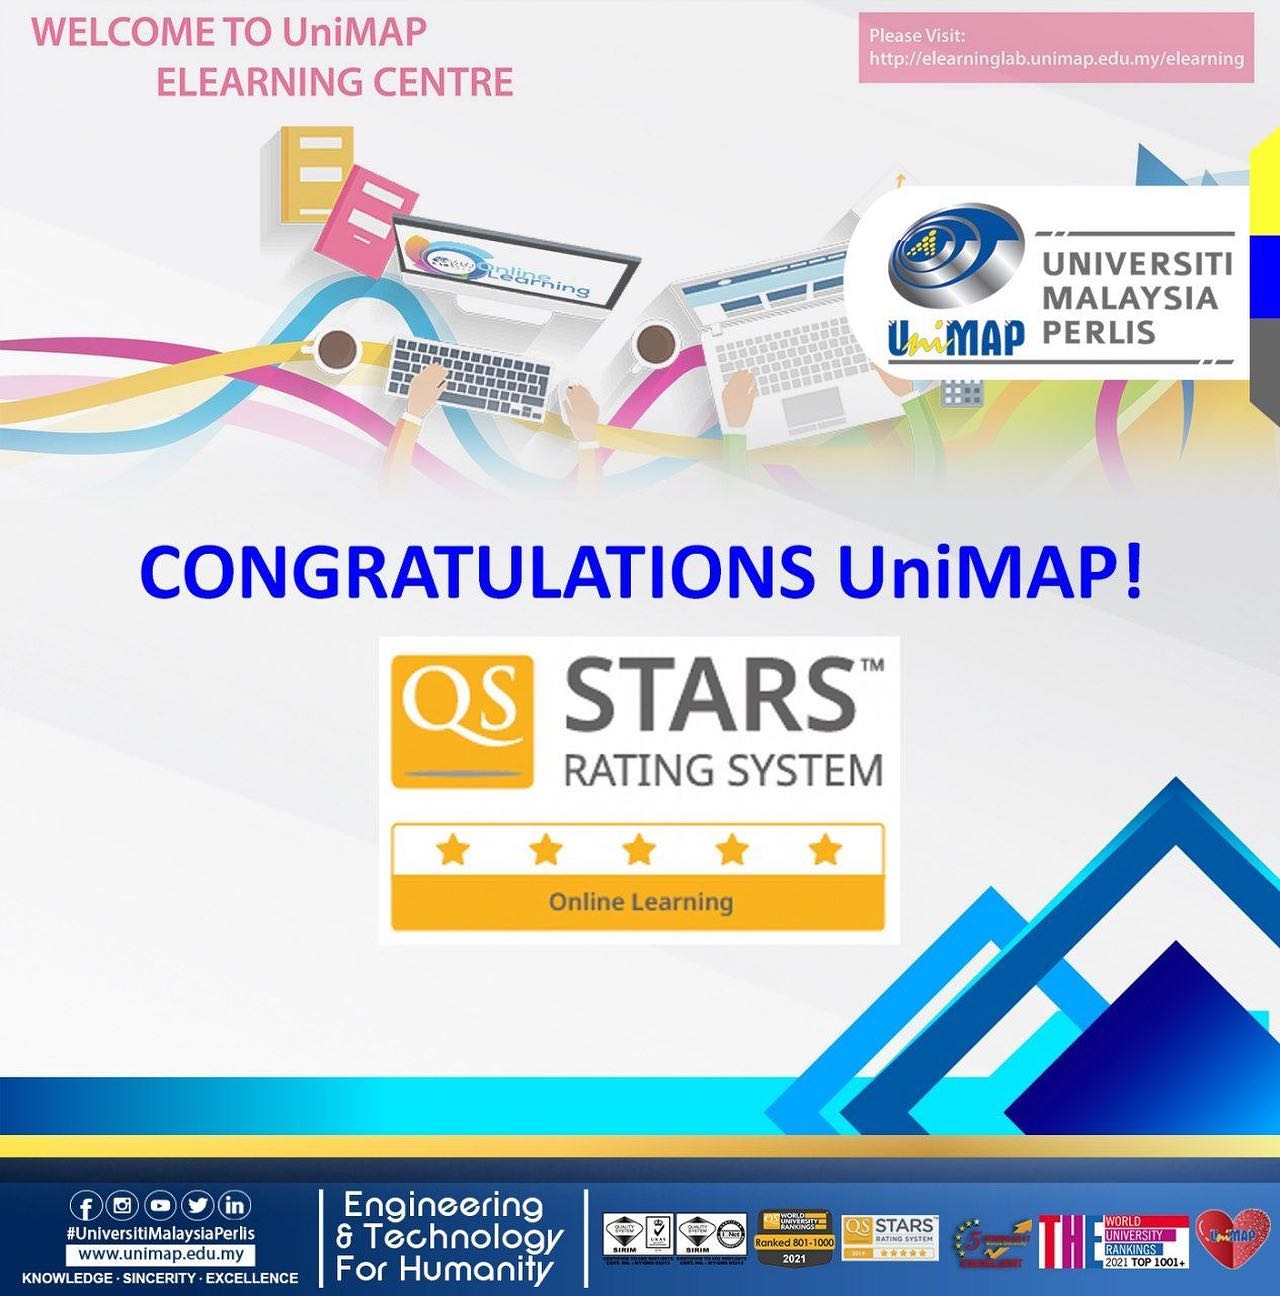 QS STAR RATING SYSTEM ONLINE LEARNING